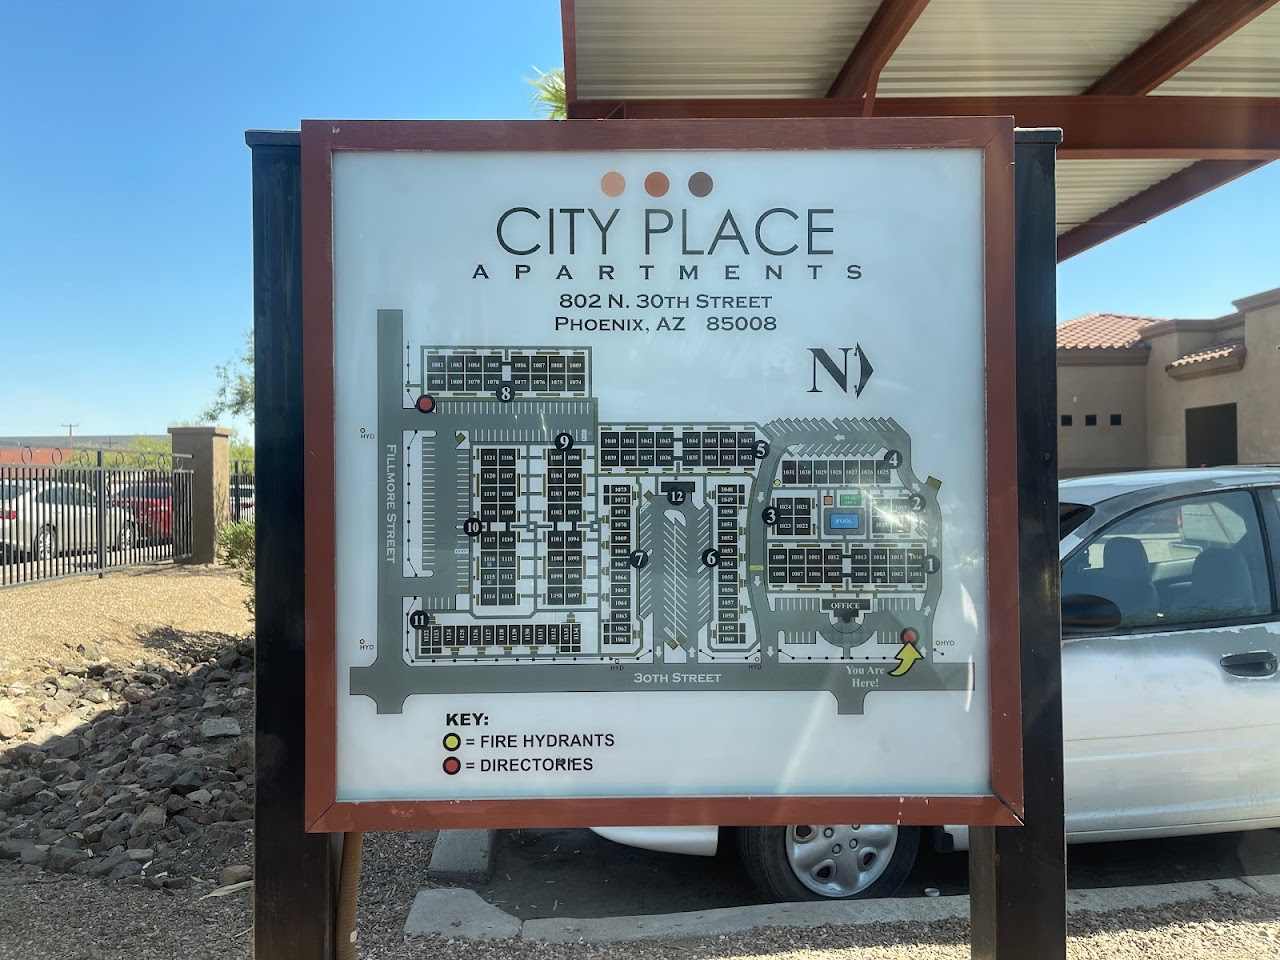 Photo of CITY PLACE. Affordable housing located at 802 N 30TH ST PHOENIX, AZ 85008